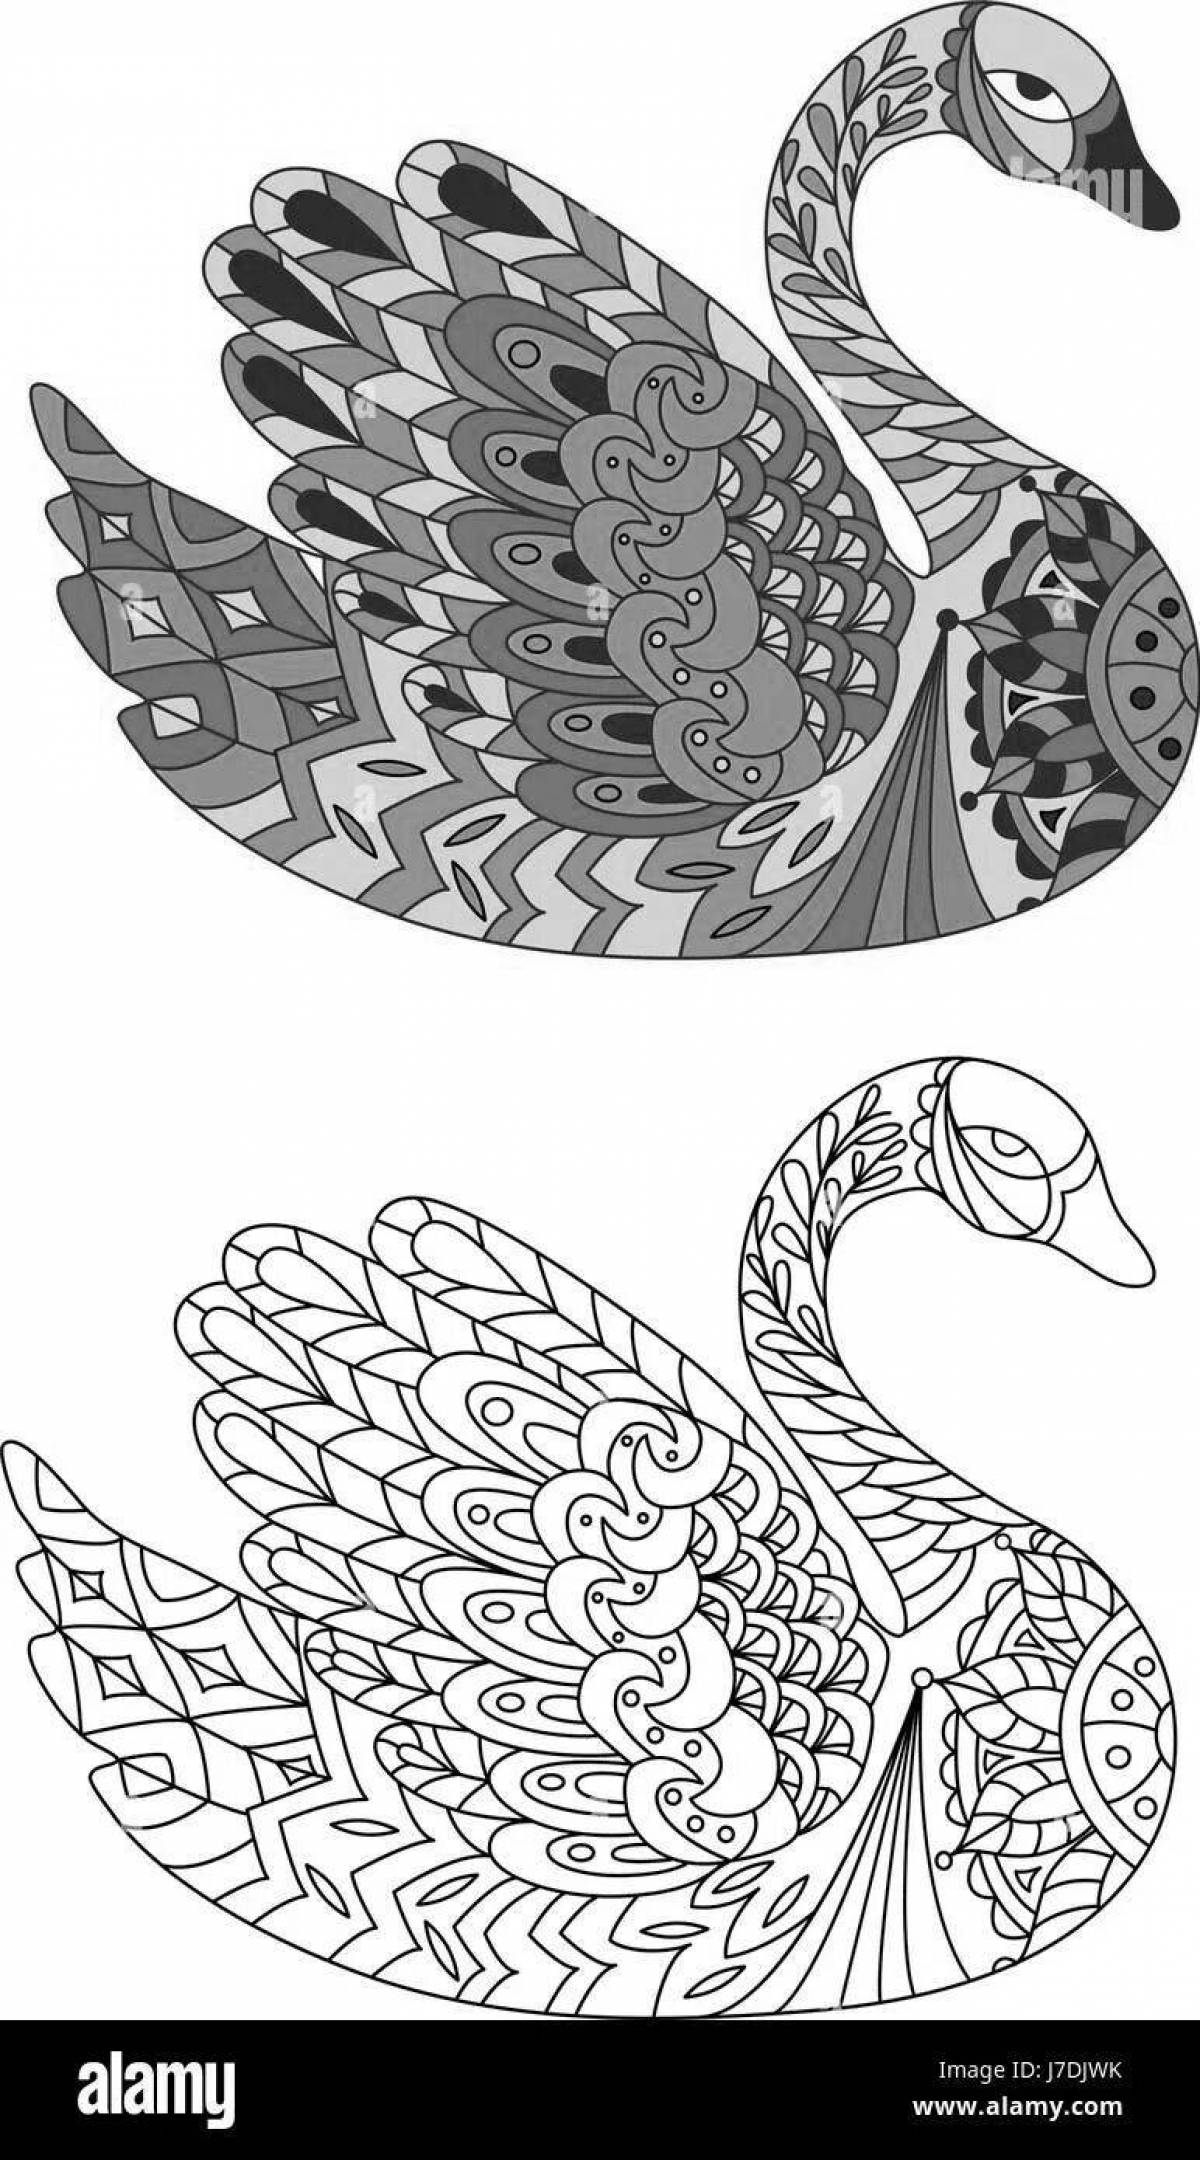 Coloring book gorgeous antistress swan